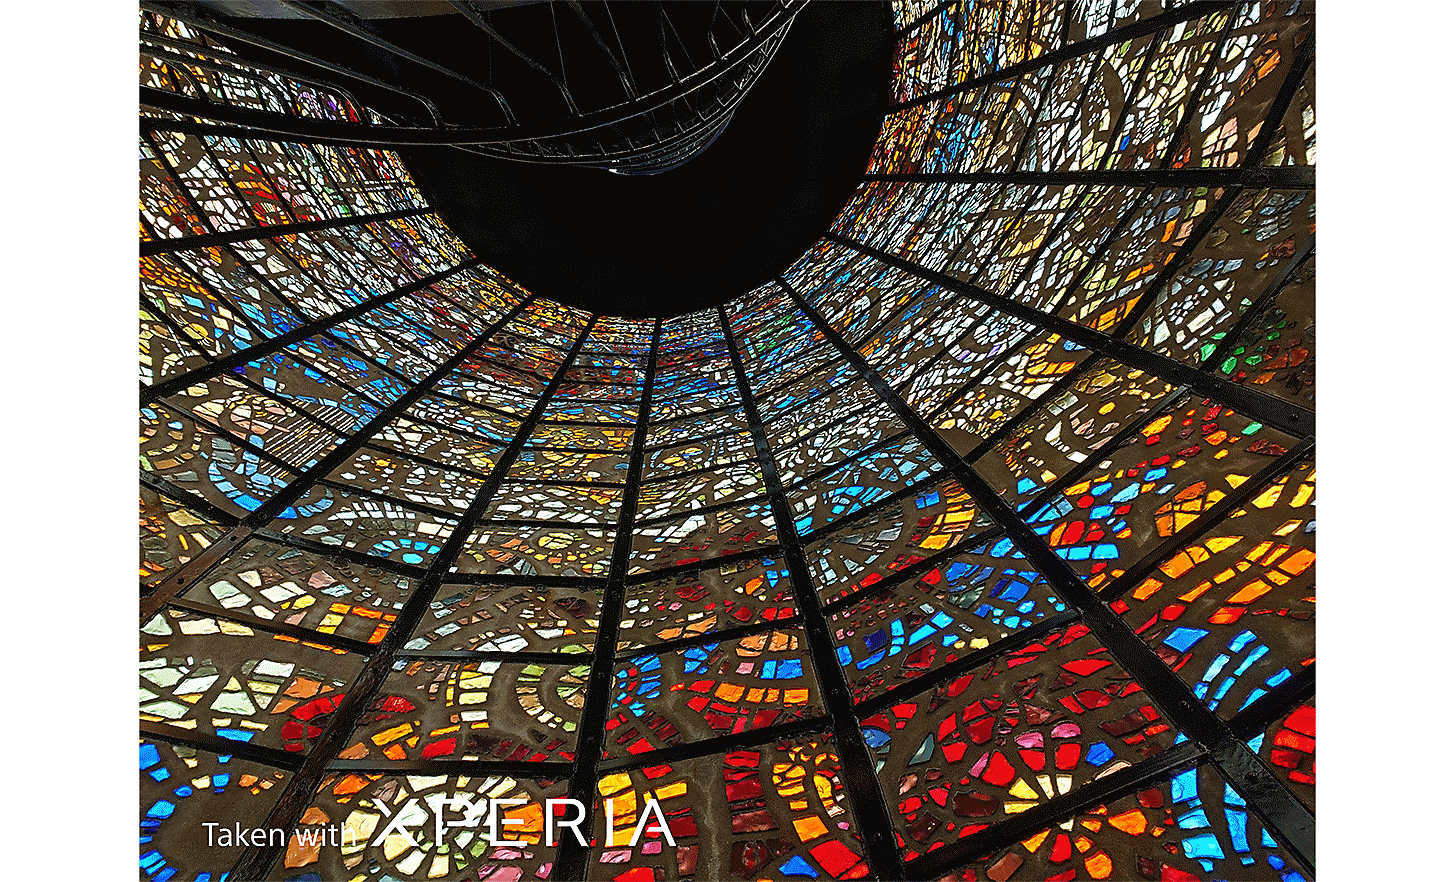 Dramatic image of a vast, brightly coloured, stained-glass window. Text reads "Taken with XPERIA".